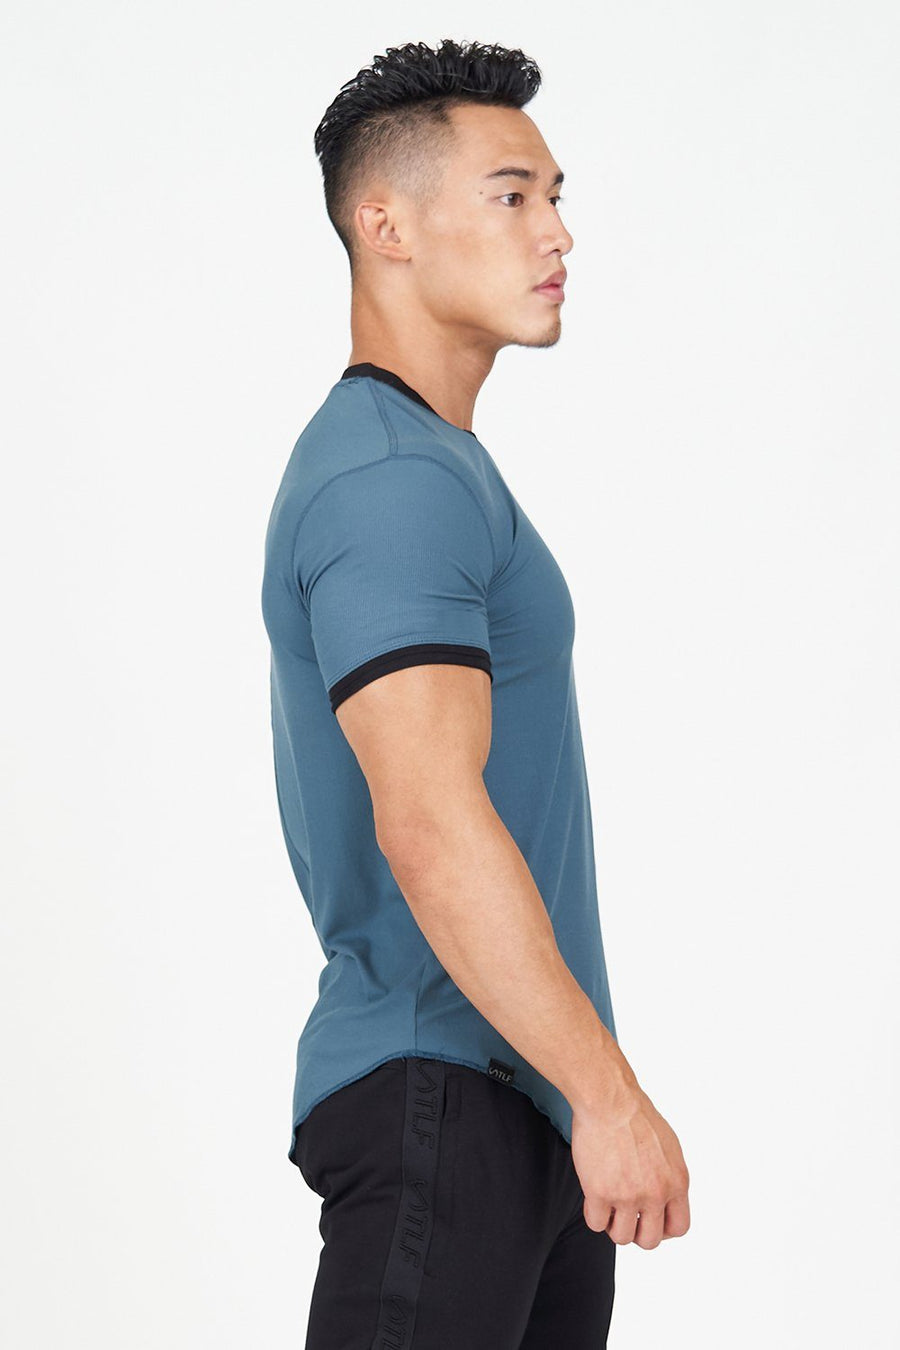 TLF Surge Classic Tee | Men's Ribbed Muscle Shirt – BLUE - 4